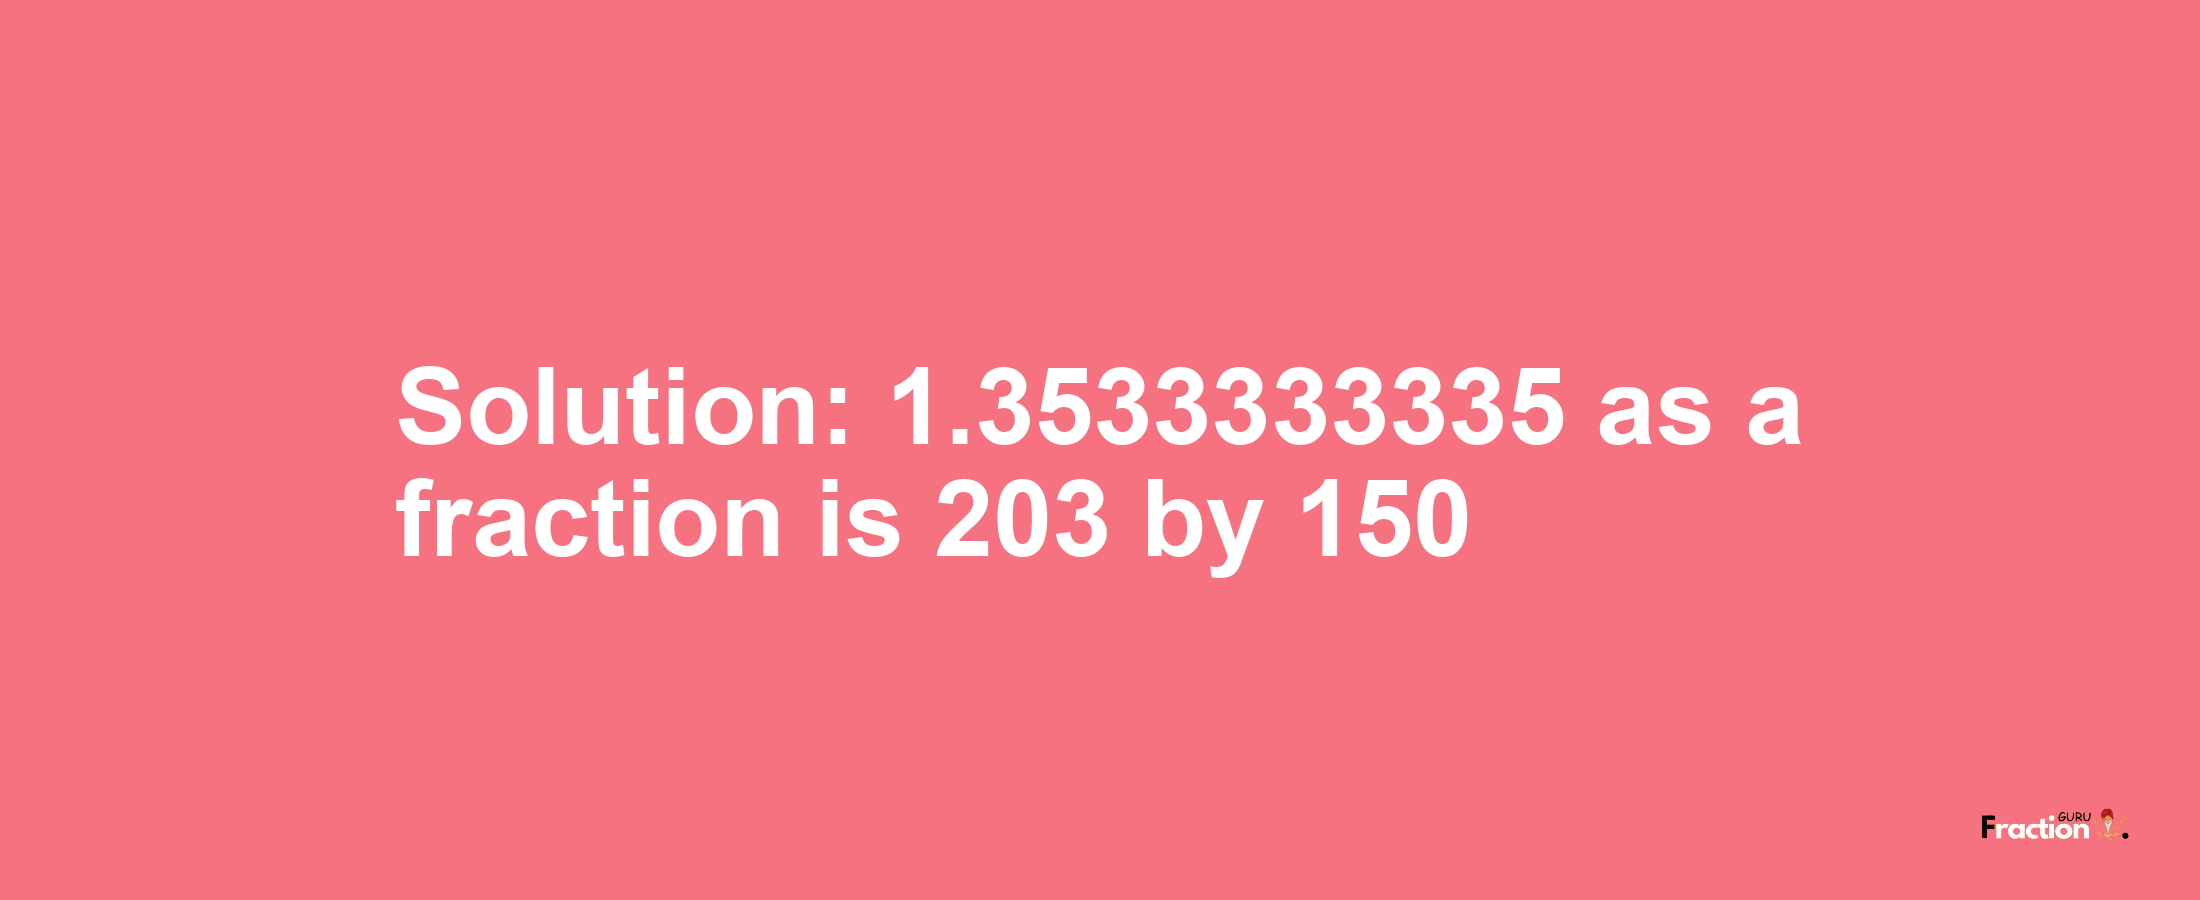 Solution:1.3533333335 as a fraction is 203/150